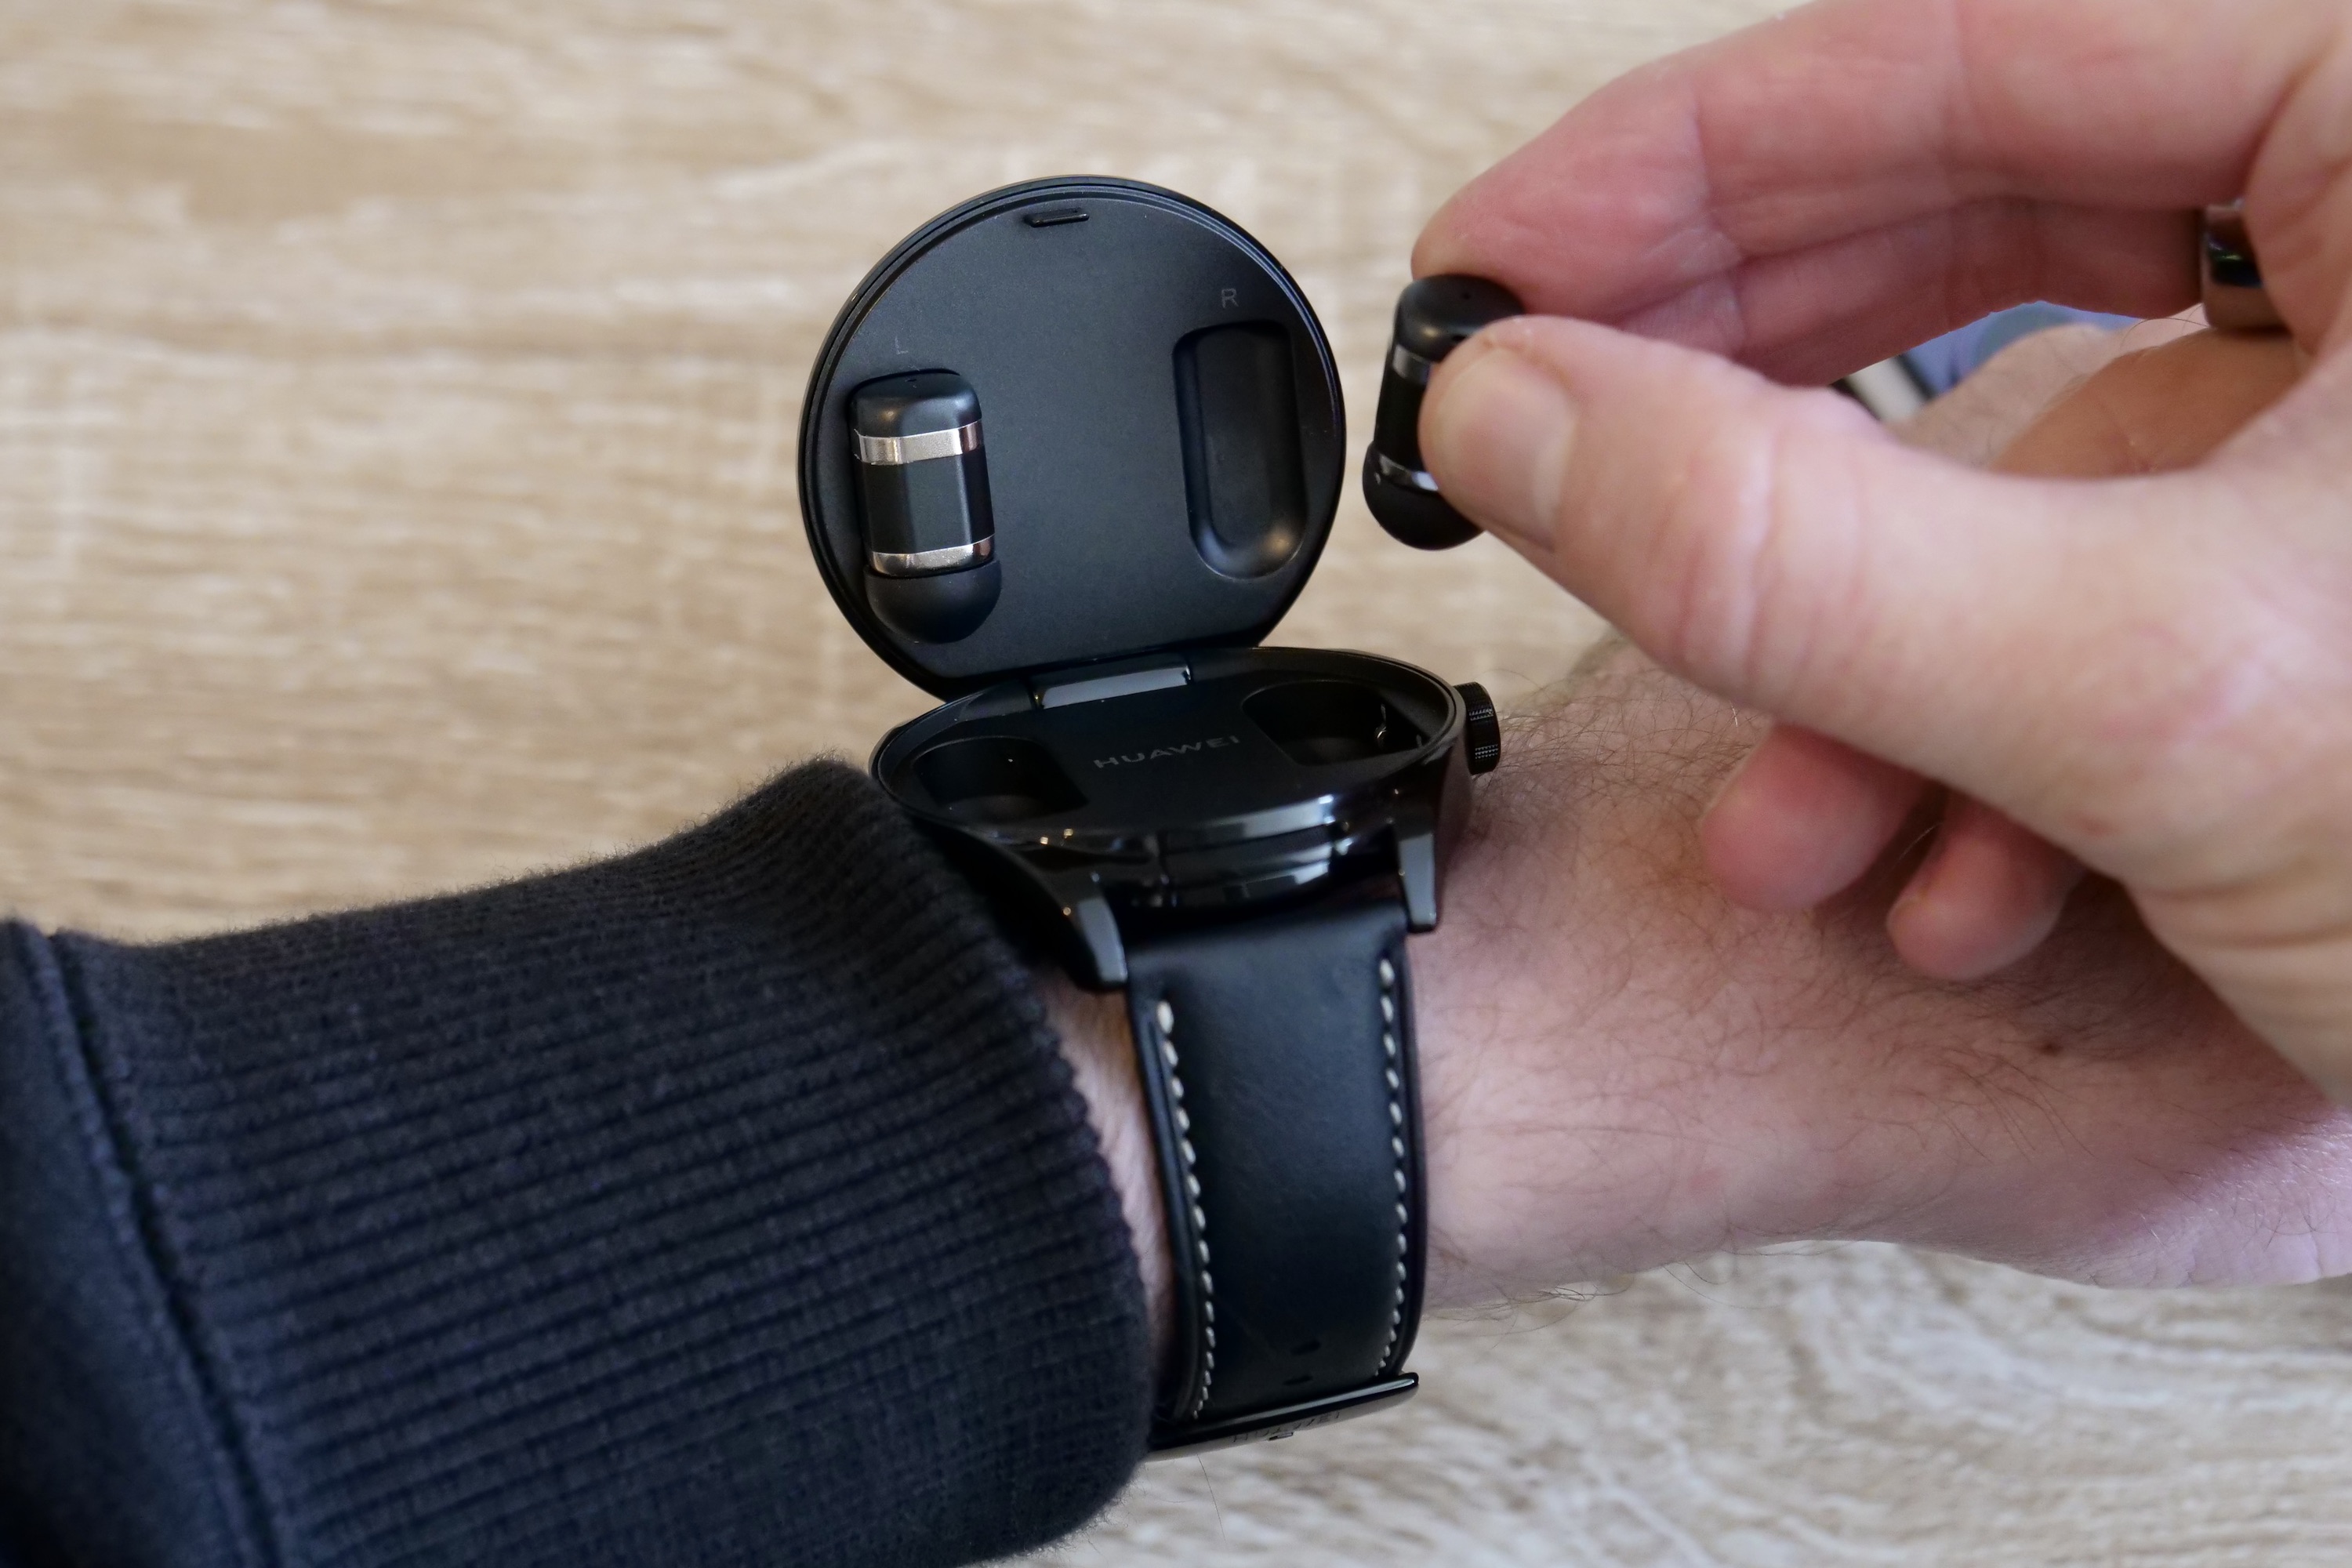 HUAWEI WATCH Buds | Earbuds and Watch comes into one - YouTube